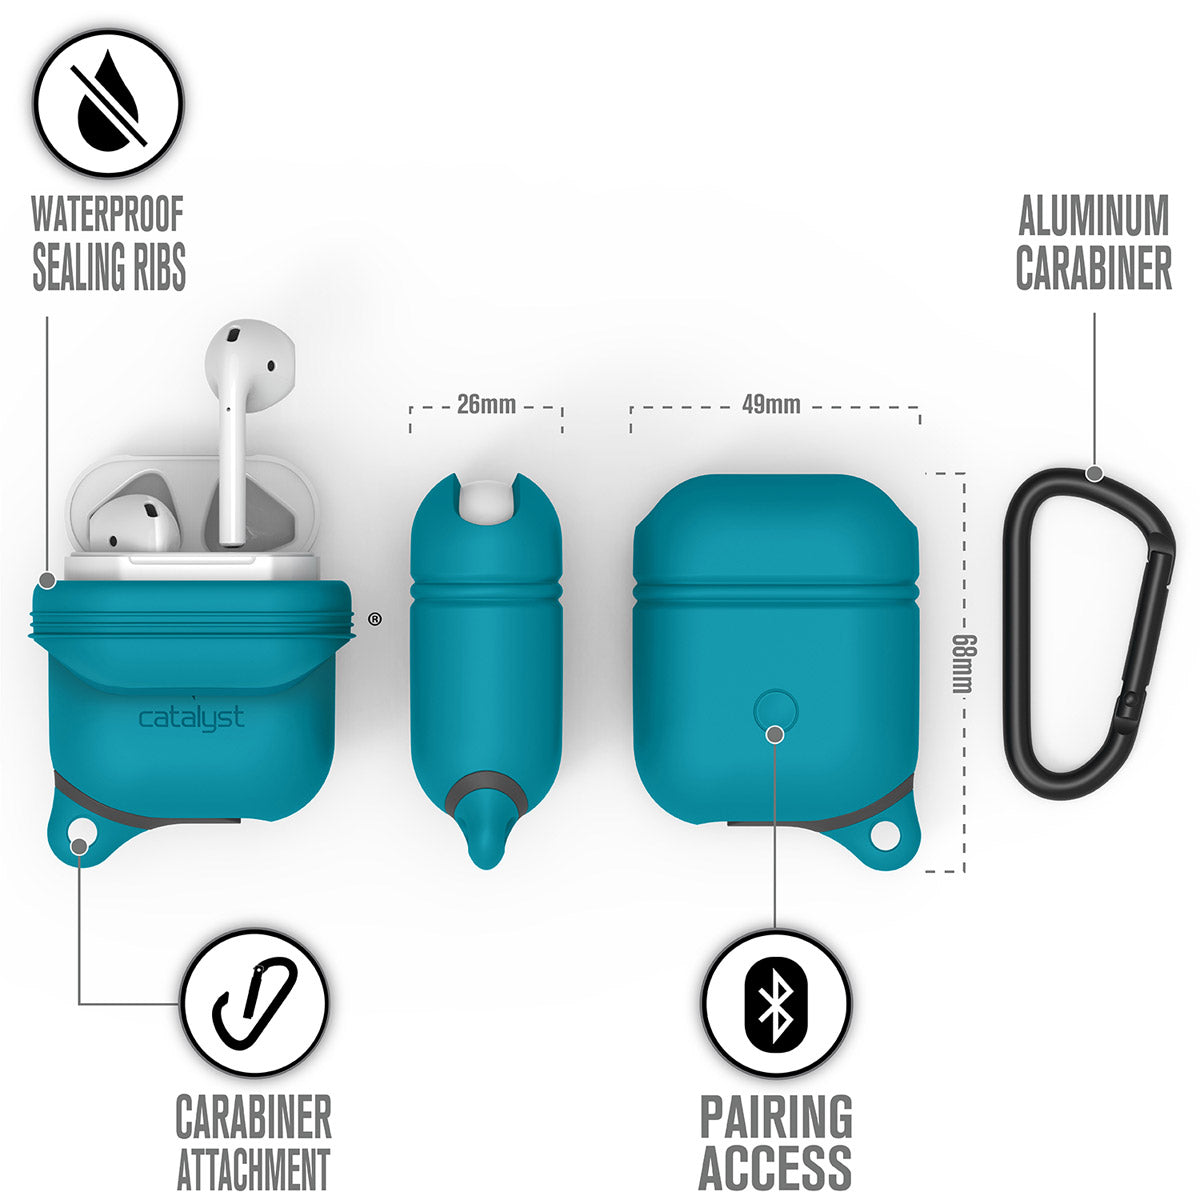 CATAPDTEAL | Catalyst airpods gen2/1 waterproof case + carabiner showing the case dimension and features in glacier blue text reads waterproof sealing ribs aluminum carabiner pairing access carabiner attachment